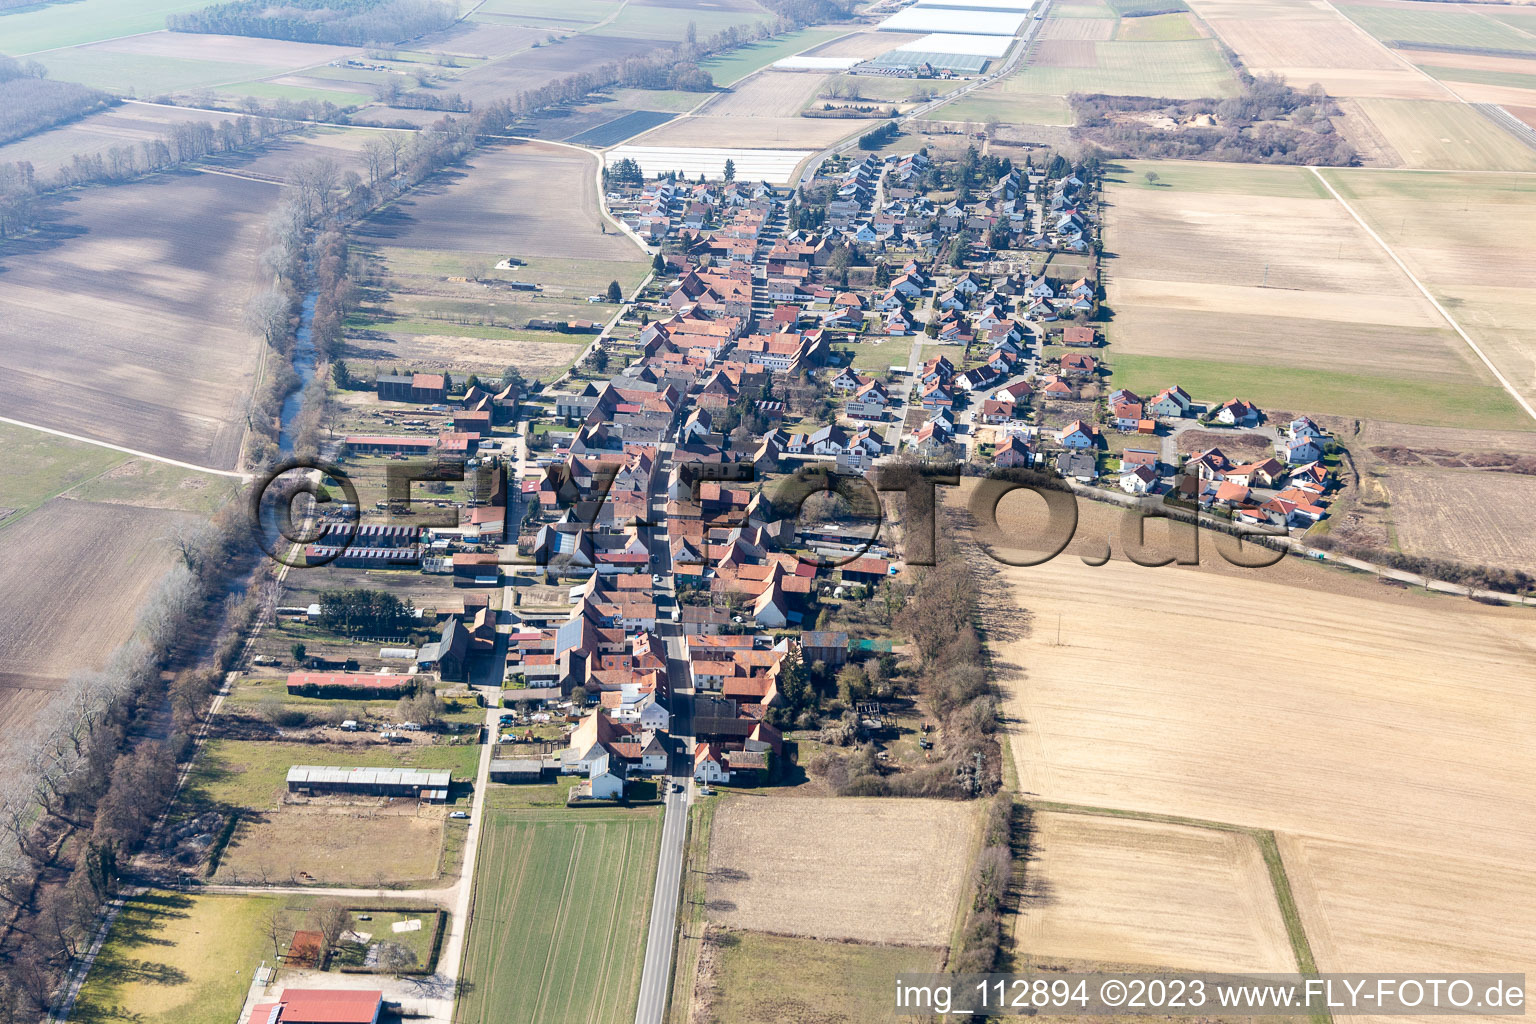 Aerial view of Village - view on the edge of agricultural fields and farmland in Herxheimweyher in the state Rhineland-Palatinate, Germany